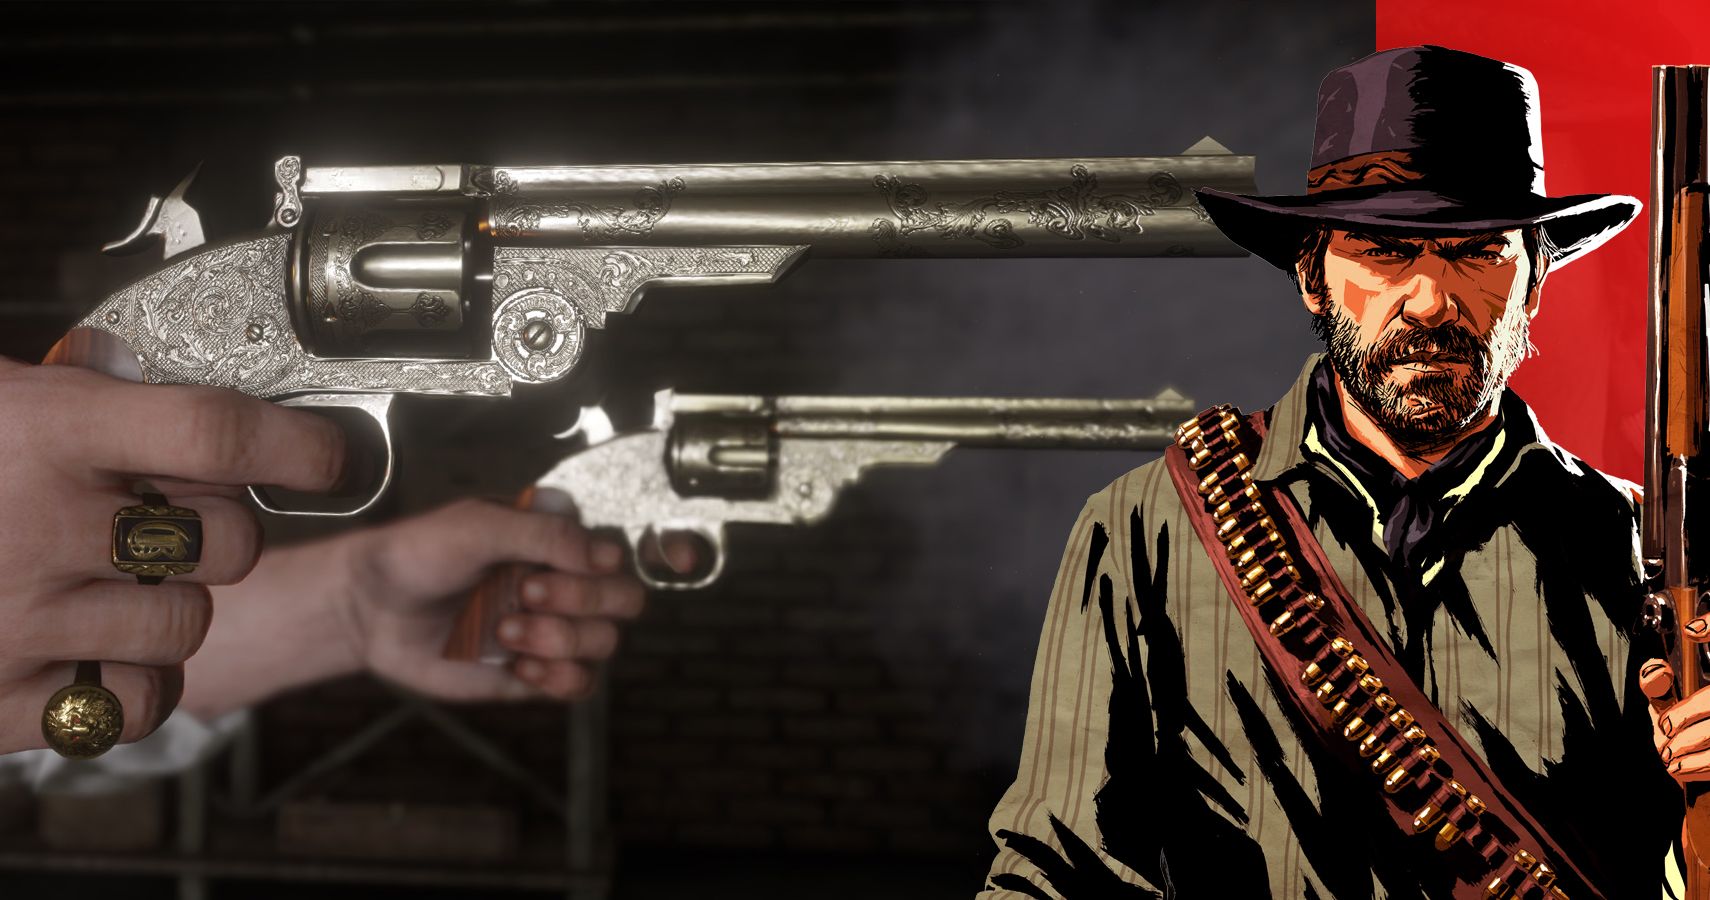 How to get themost powerfulweapon#rdr2 #GOLDBARWEAPON #fyp